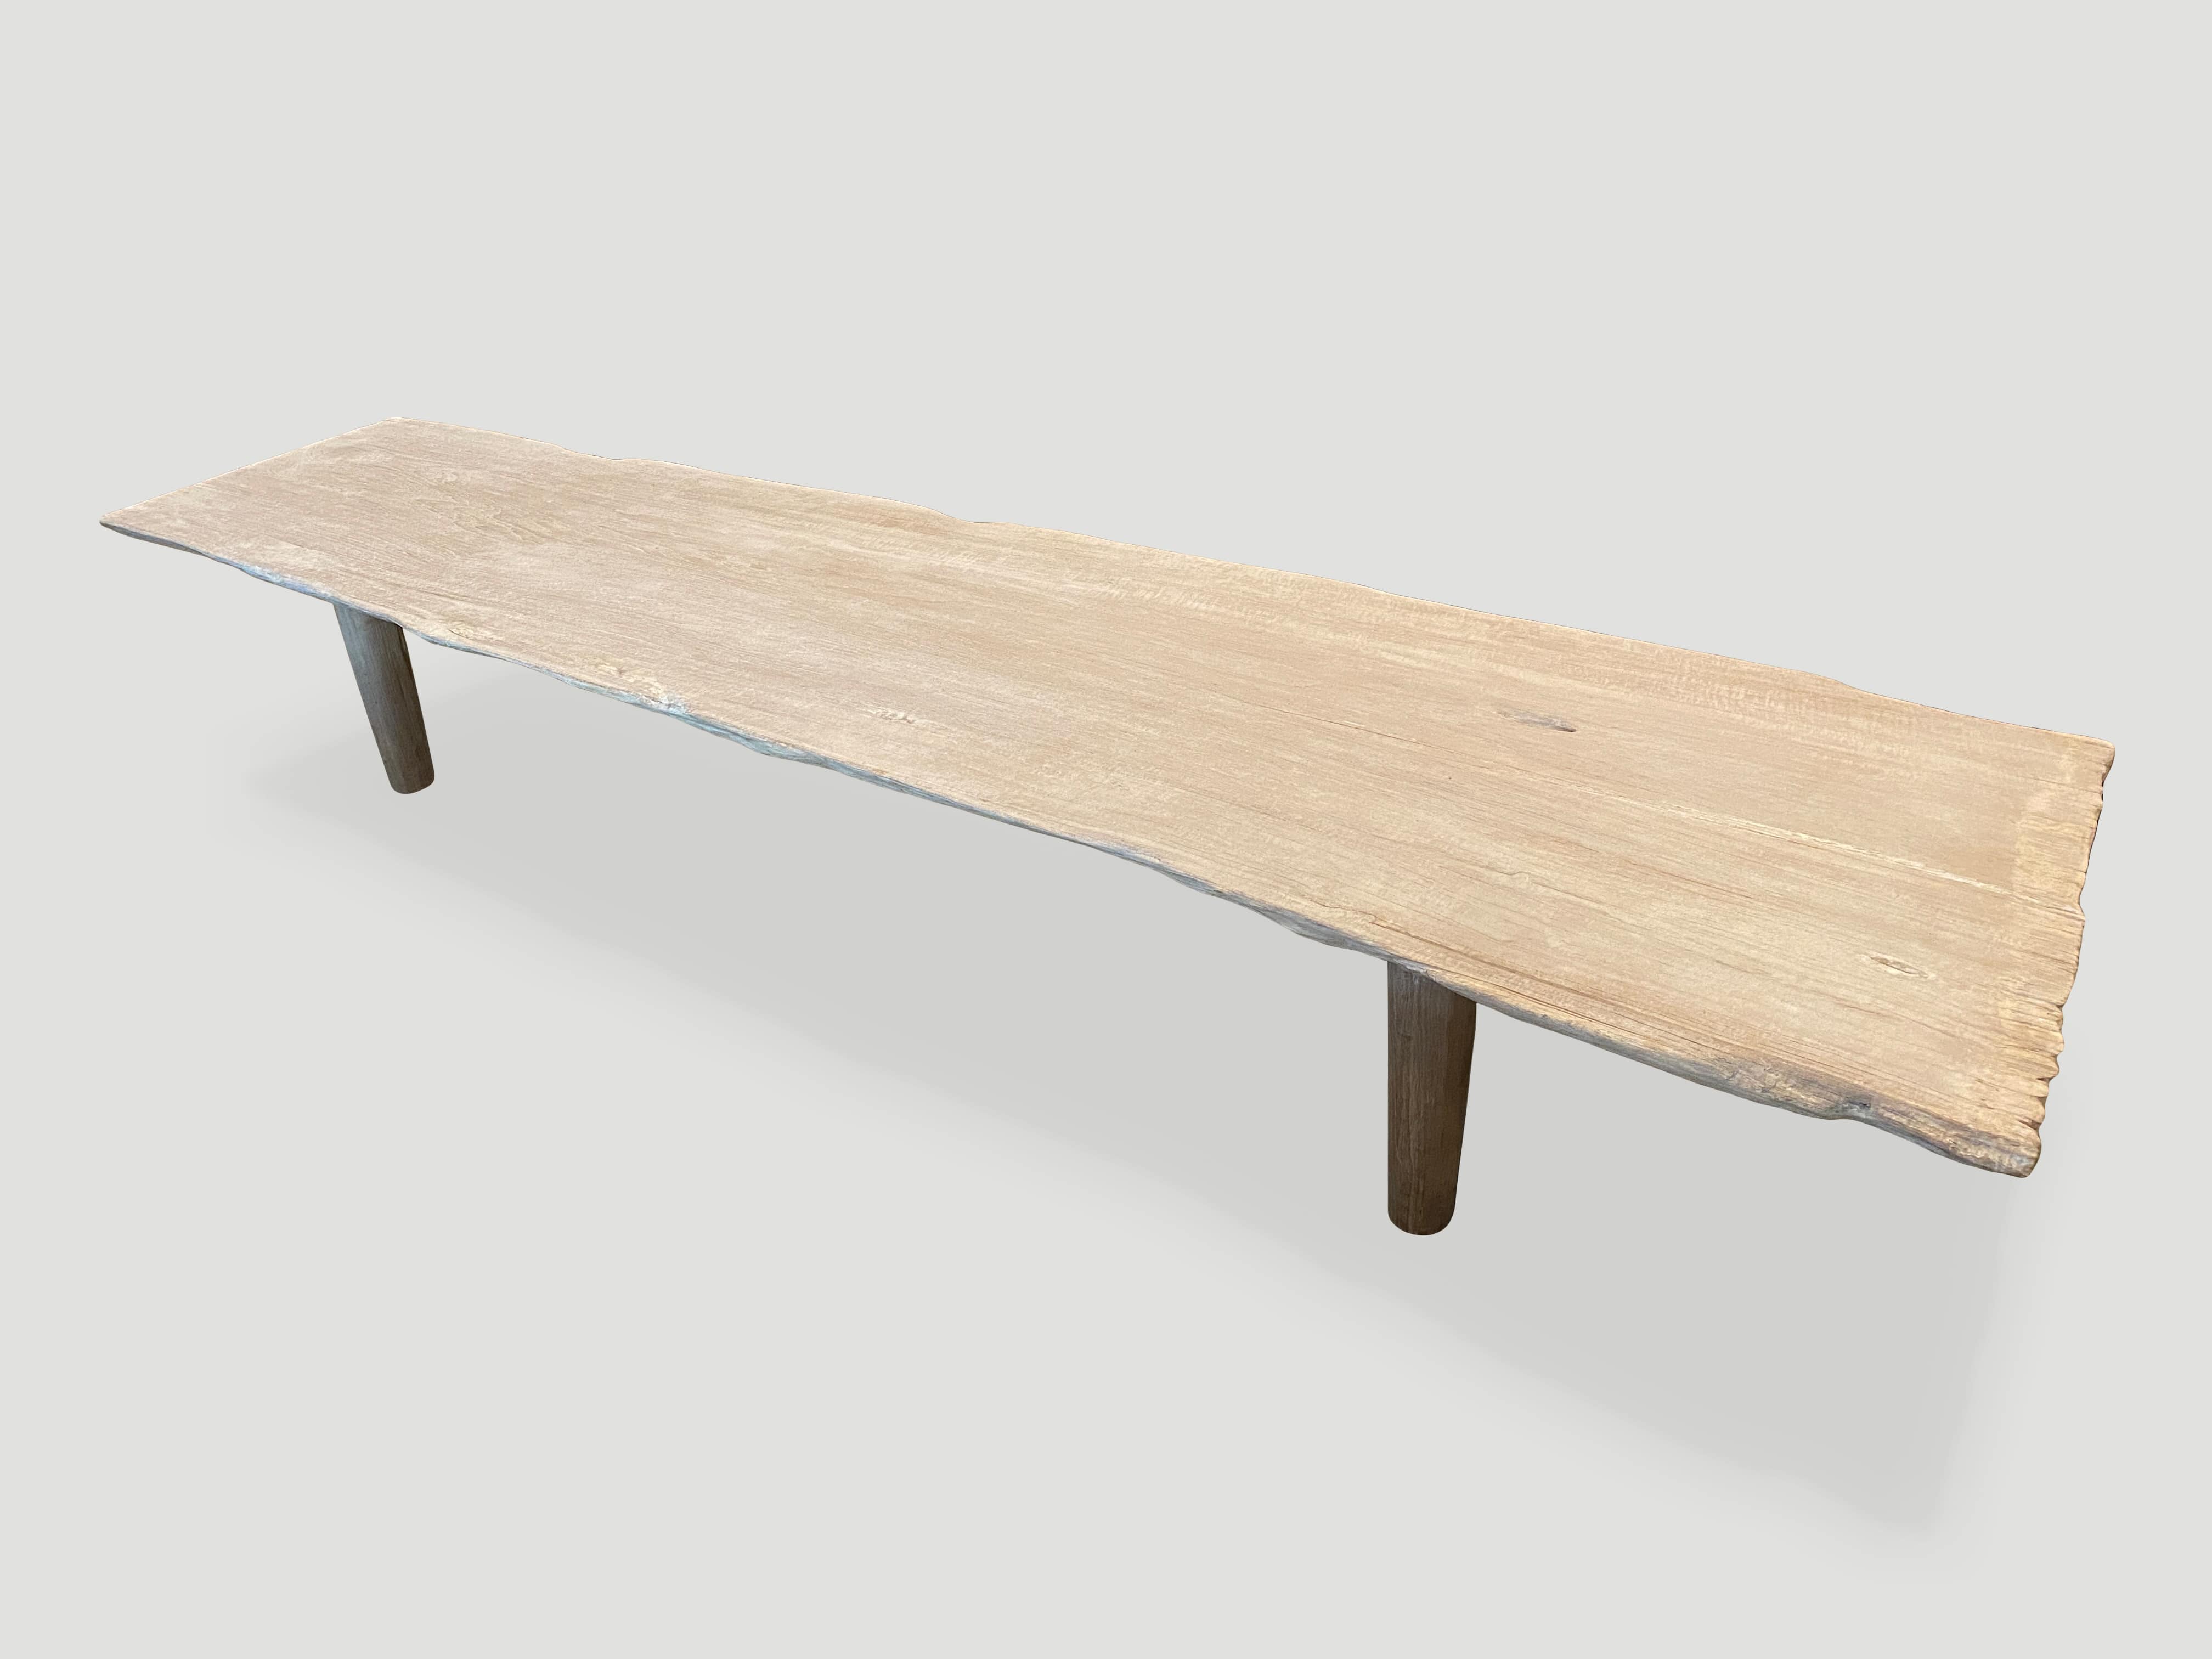 MINIMALIST BLEACHED TEAK COFFEE TABLE OR BENCH